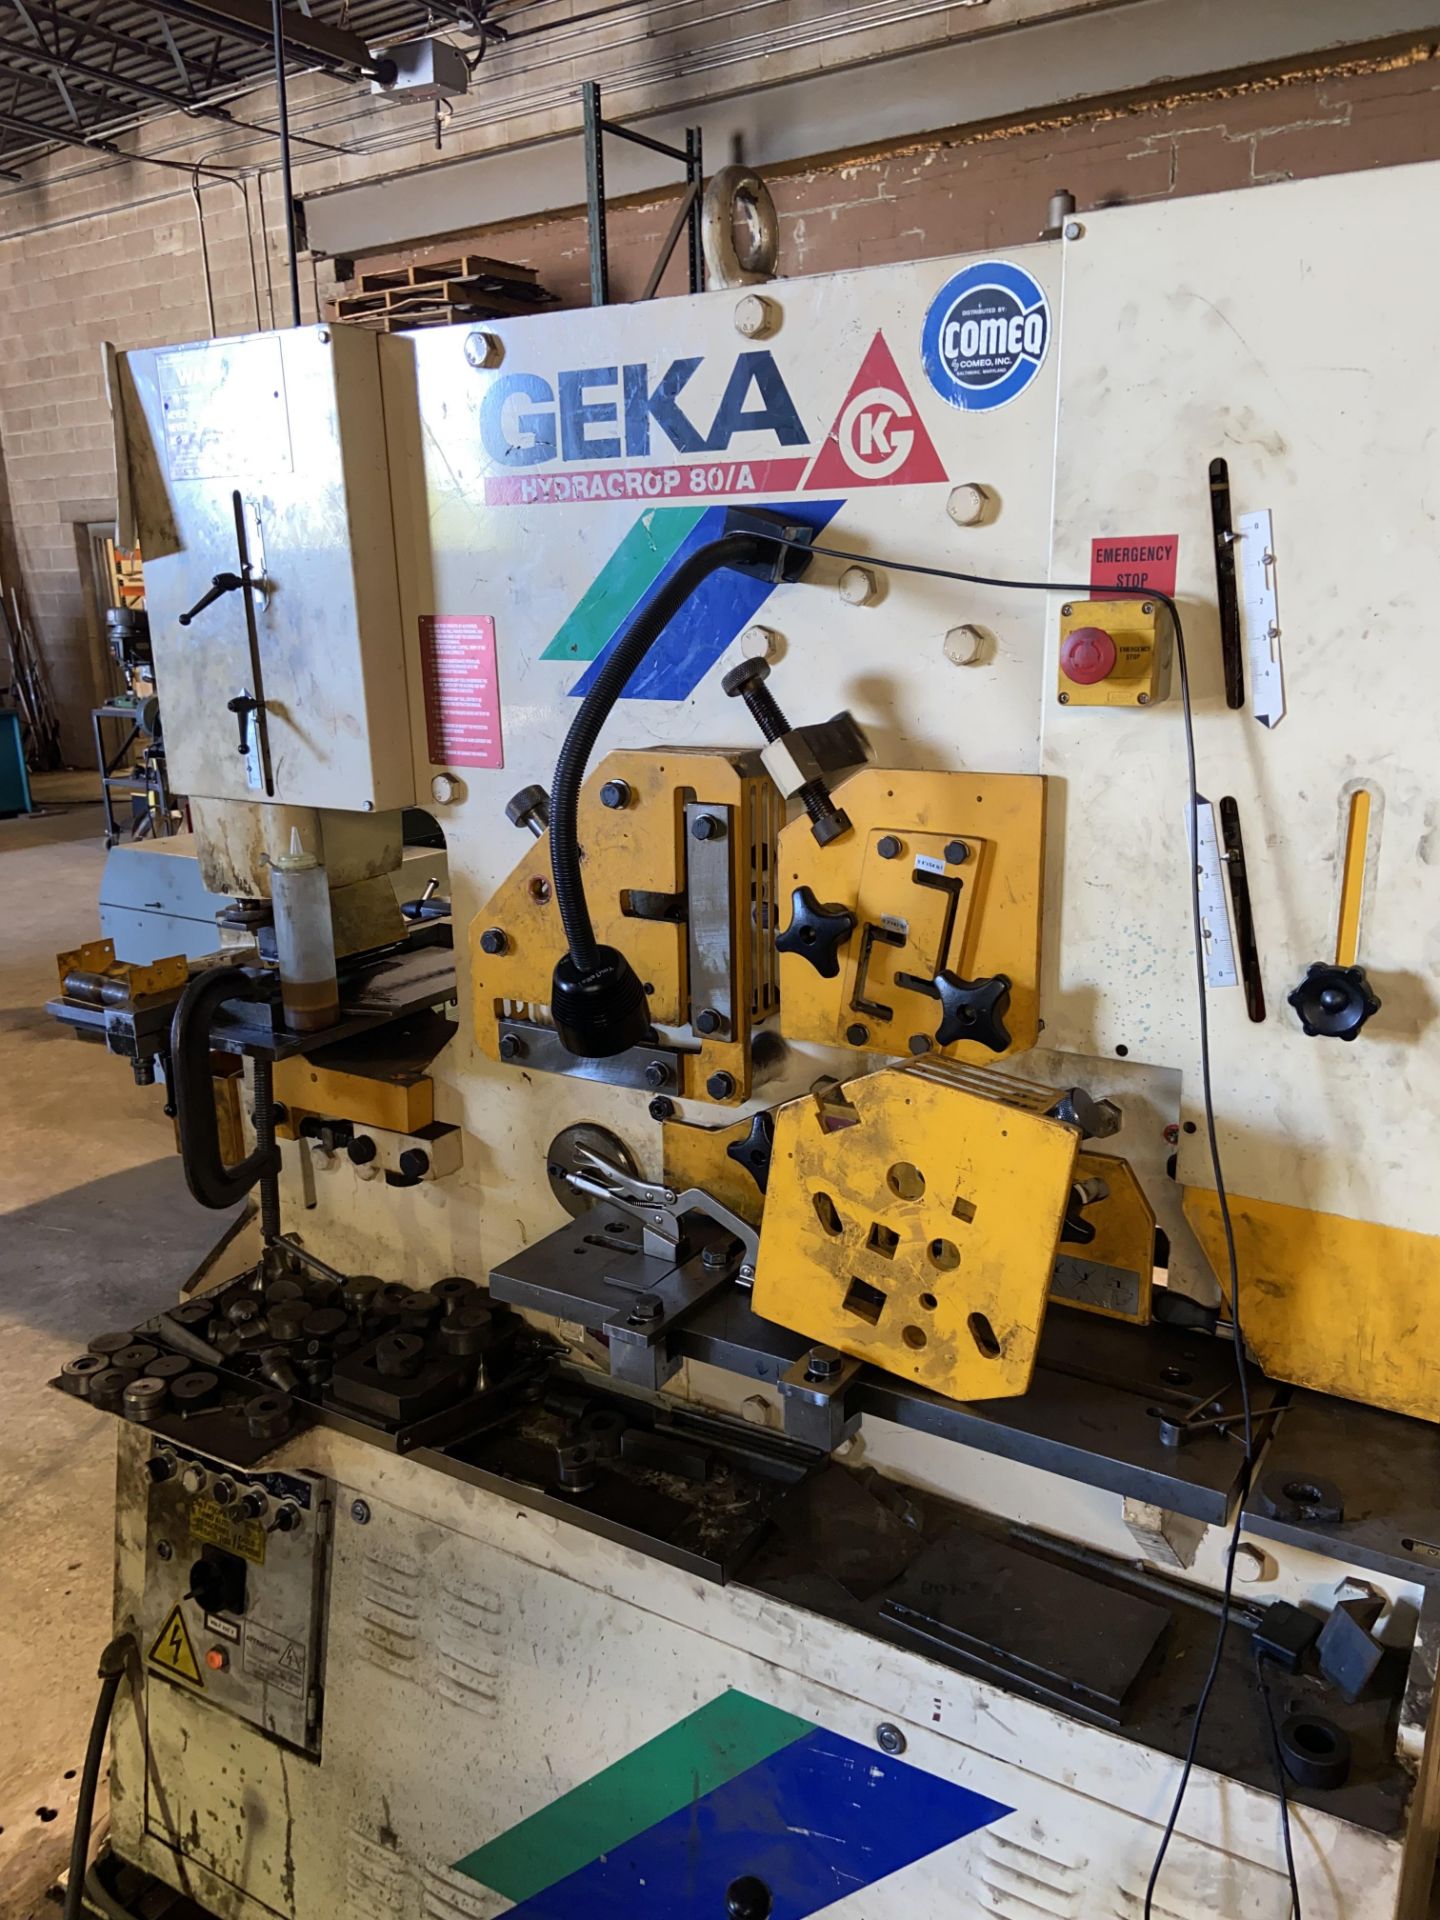 GEKA Hydracrop 80/A Hydraulic Punch Machine, S/N 8729, with Foot Control - Image 7 of 10